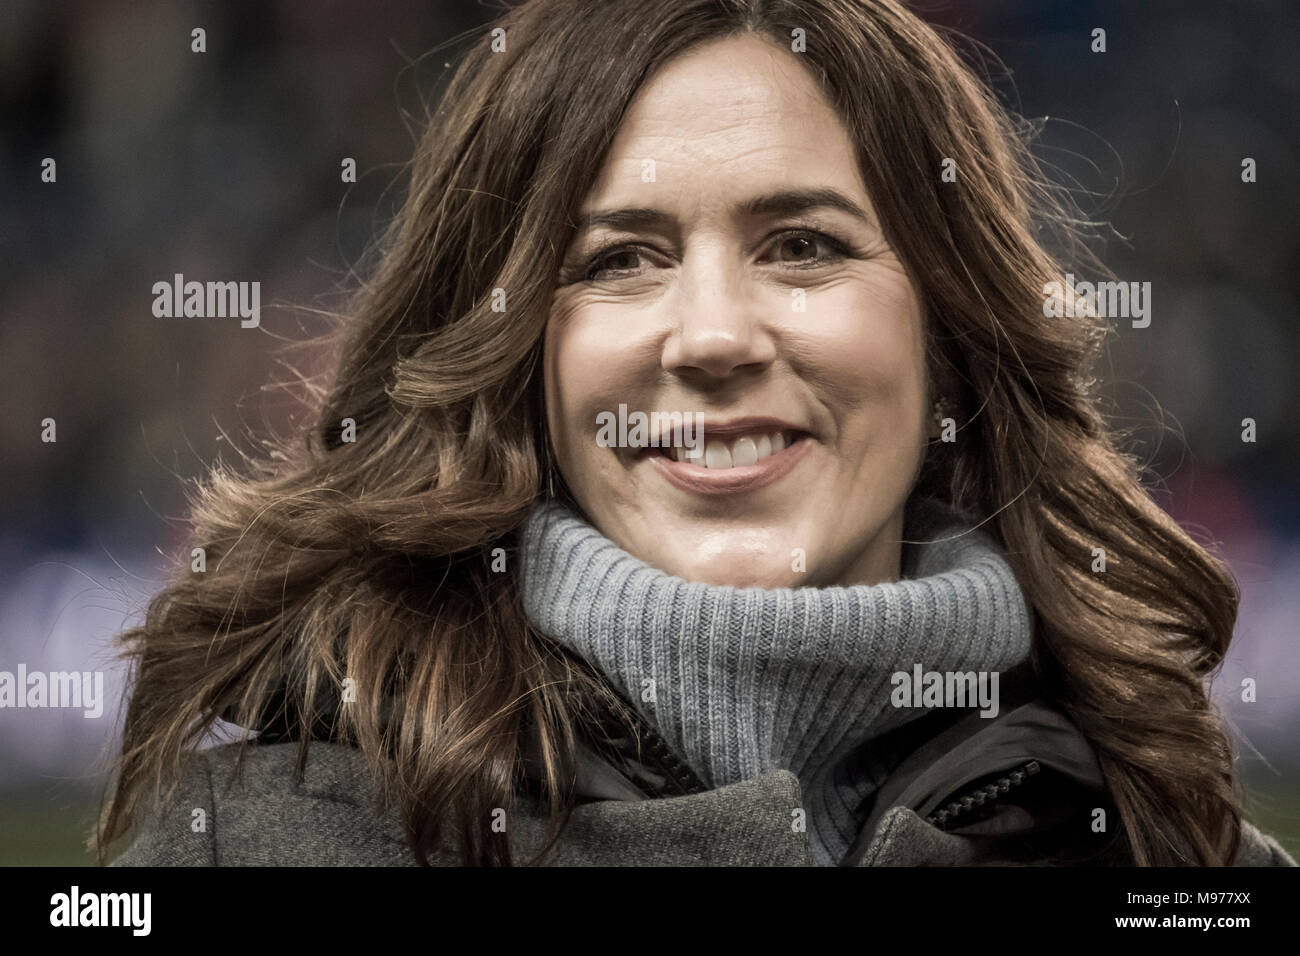 Brøndby, Denmark. 22nd Mar, 2018. Mary, Crown Princess of Denmark, seen at Brøndby Stadion before the football friendly between Denmark and Panama. The Mary Foundation has been awarded the UEFA Foundation for Children Donation. (Photo credit: Gonzales Photo - Kim M. Leland). Credit: Gonzales Photo/Alamy Live News Stock Photo